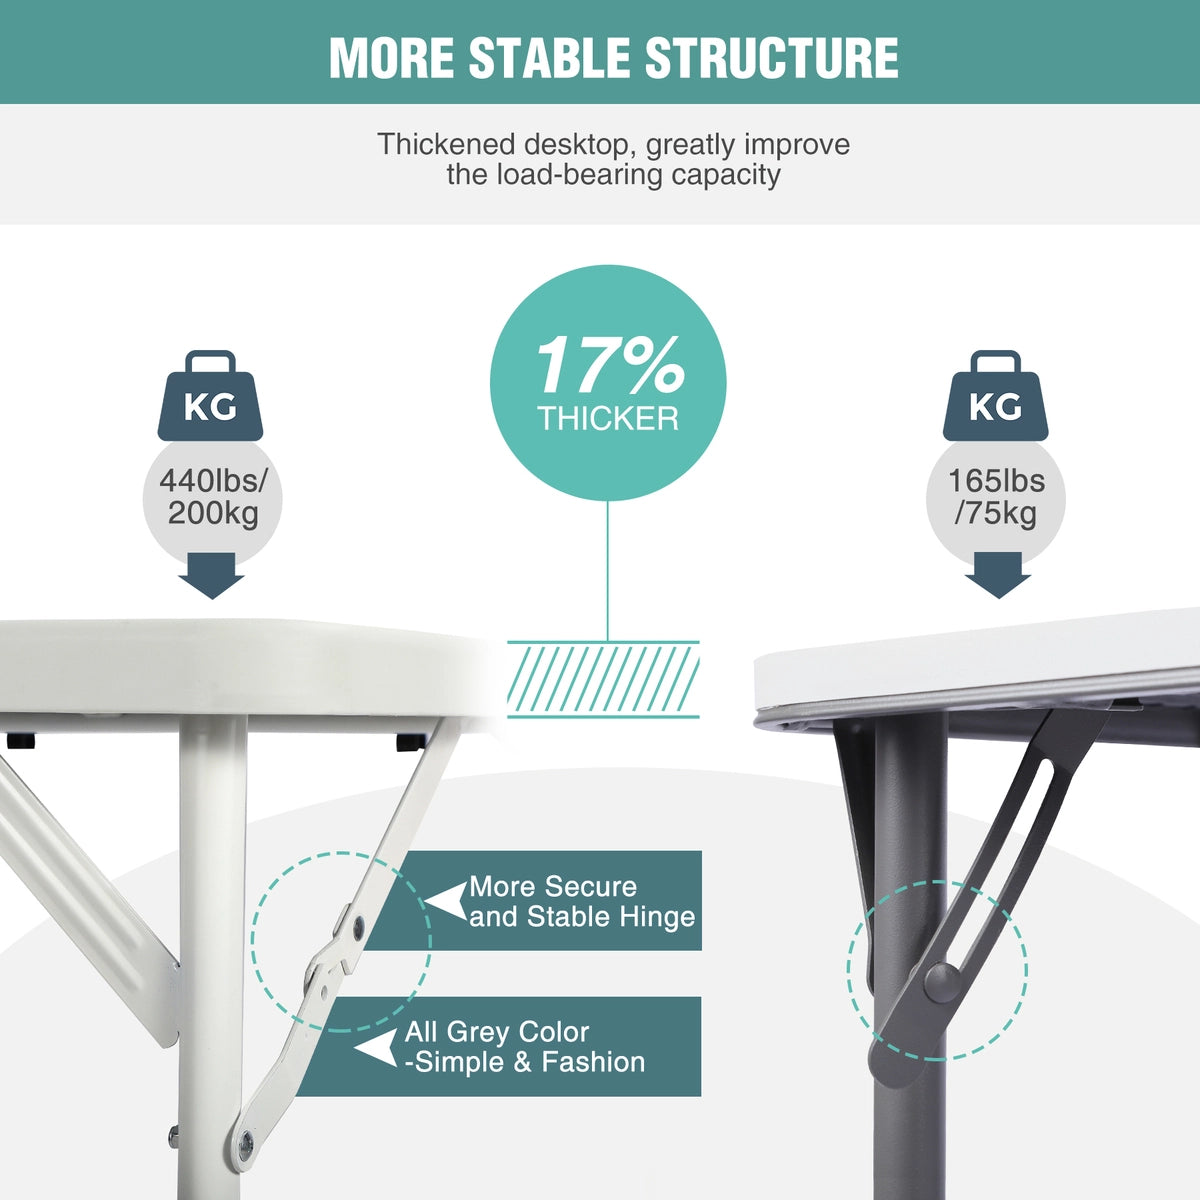 Square Folding Card Table with Collapsible Legs